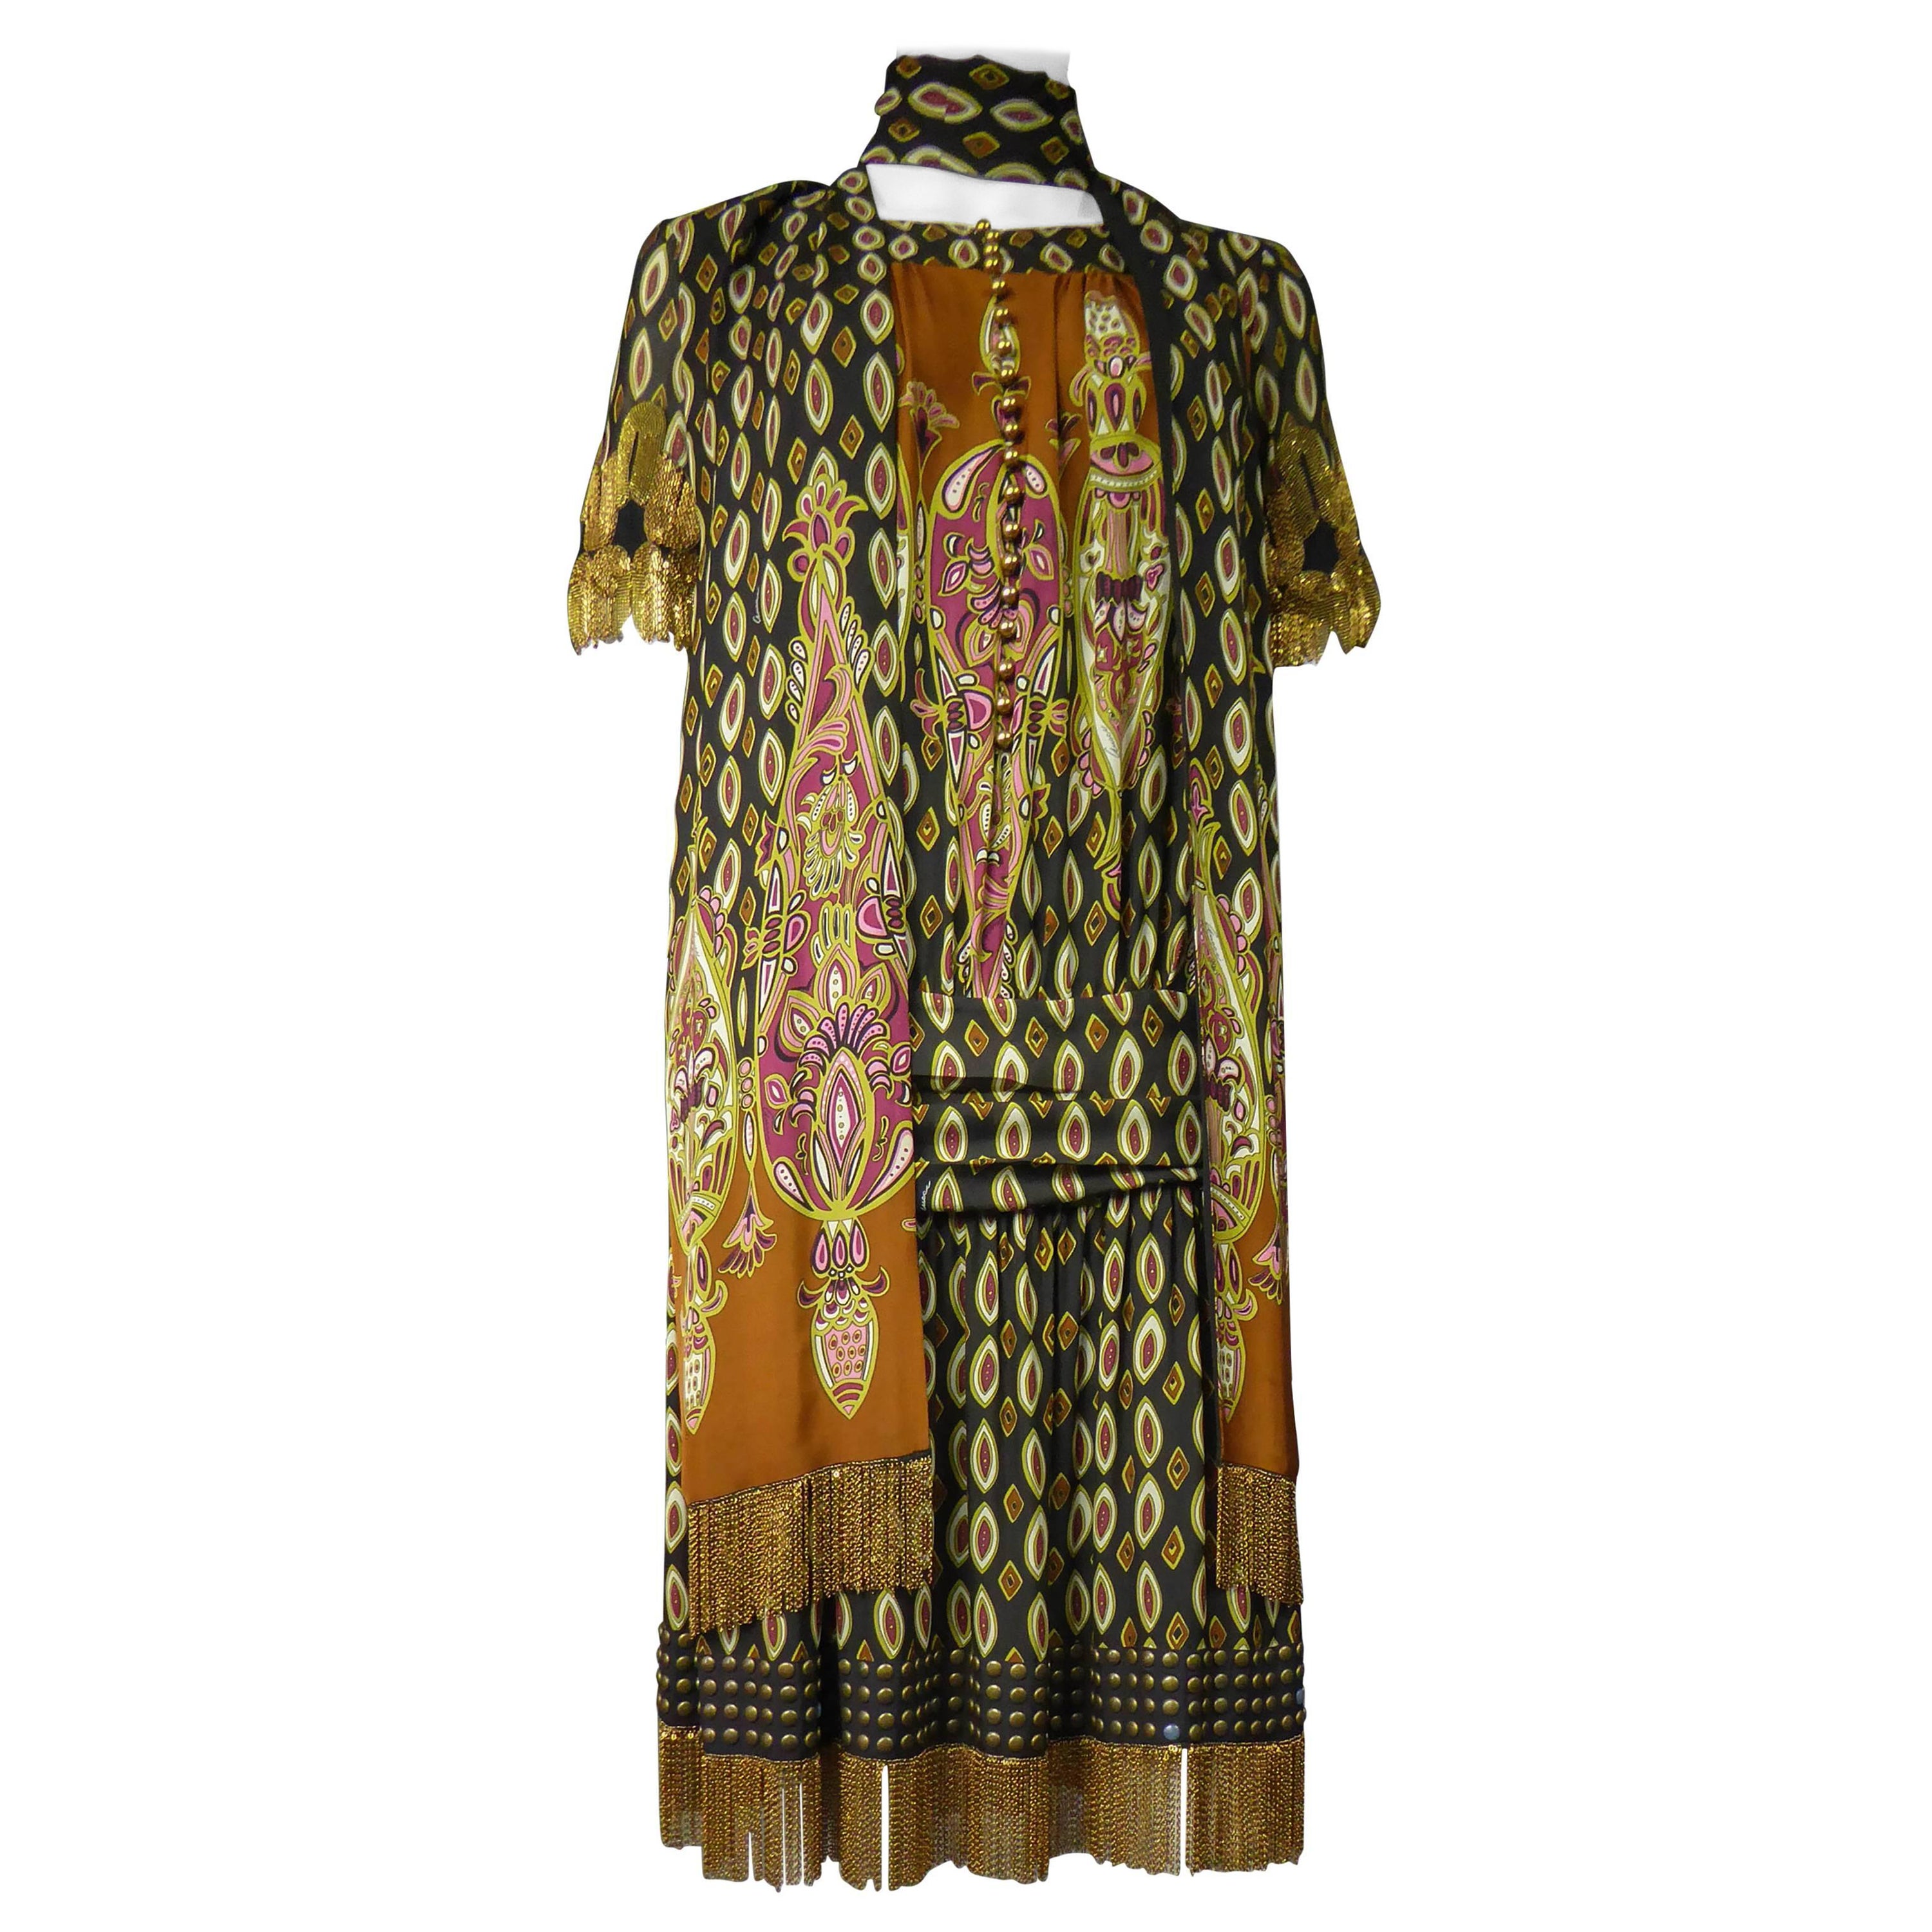 A Printed Silk Gucci Dress Fall / Winter 2008 - 2009 For Sale